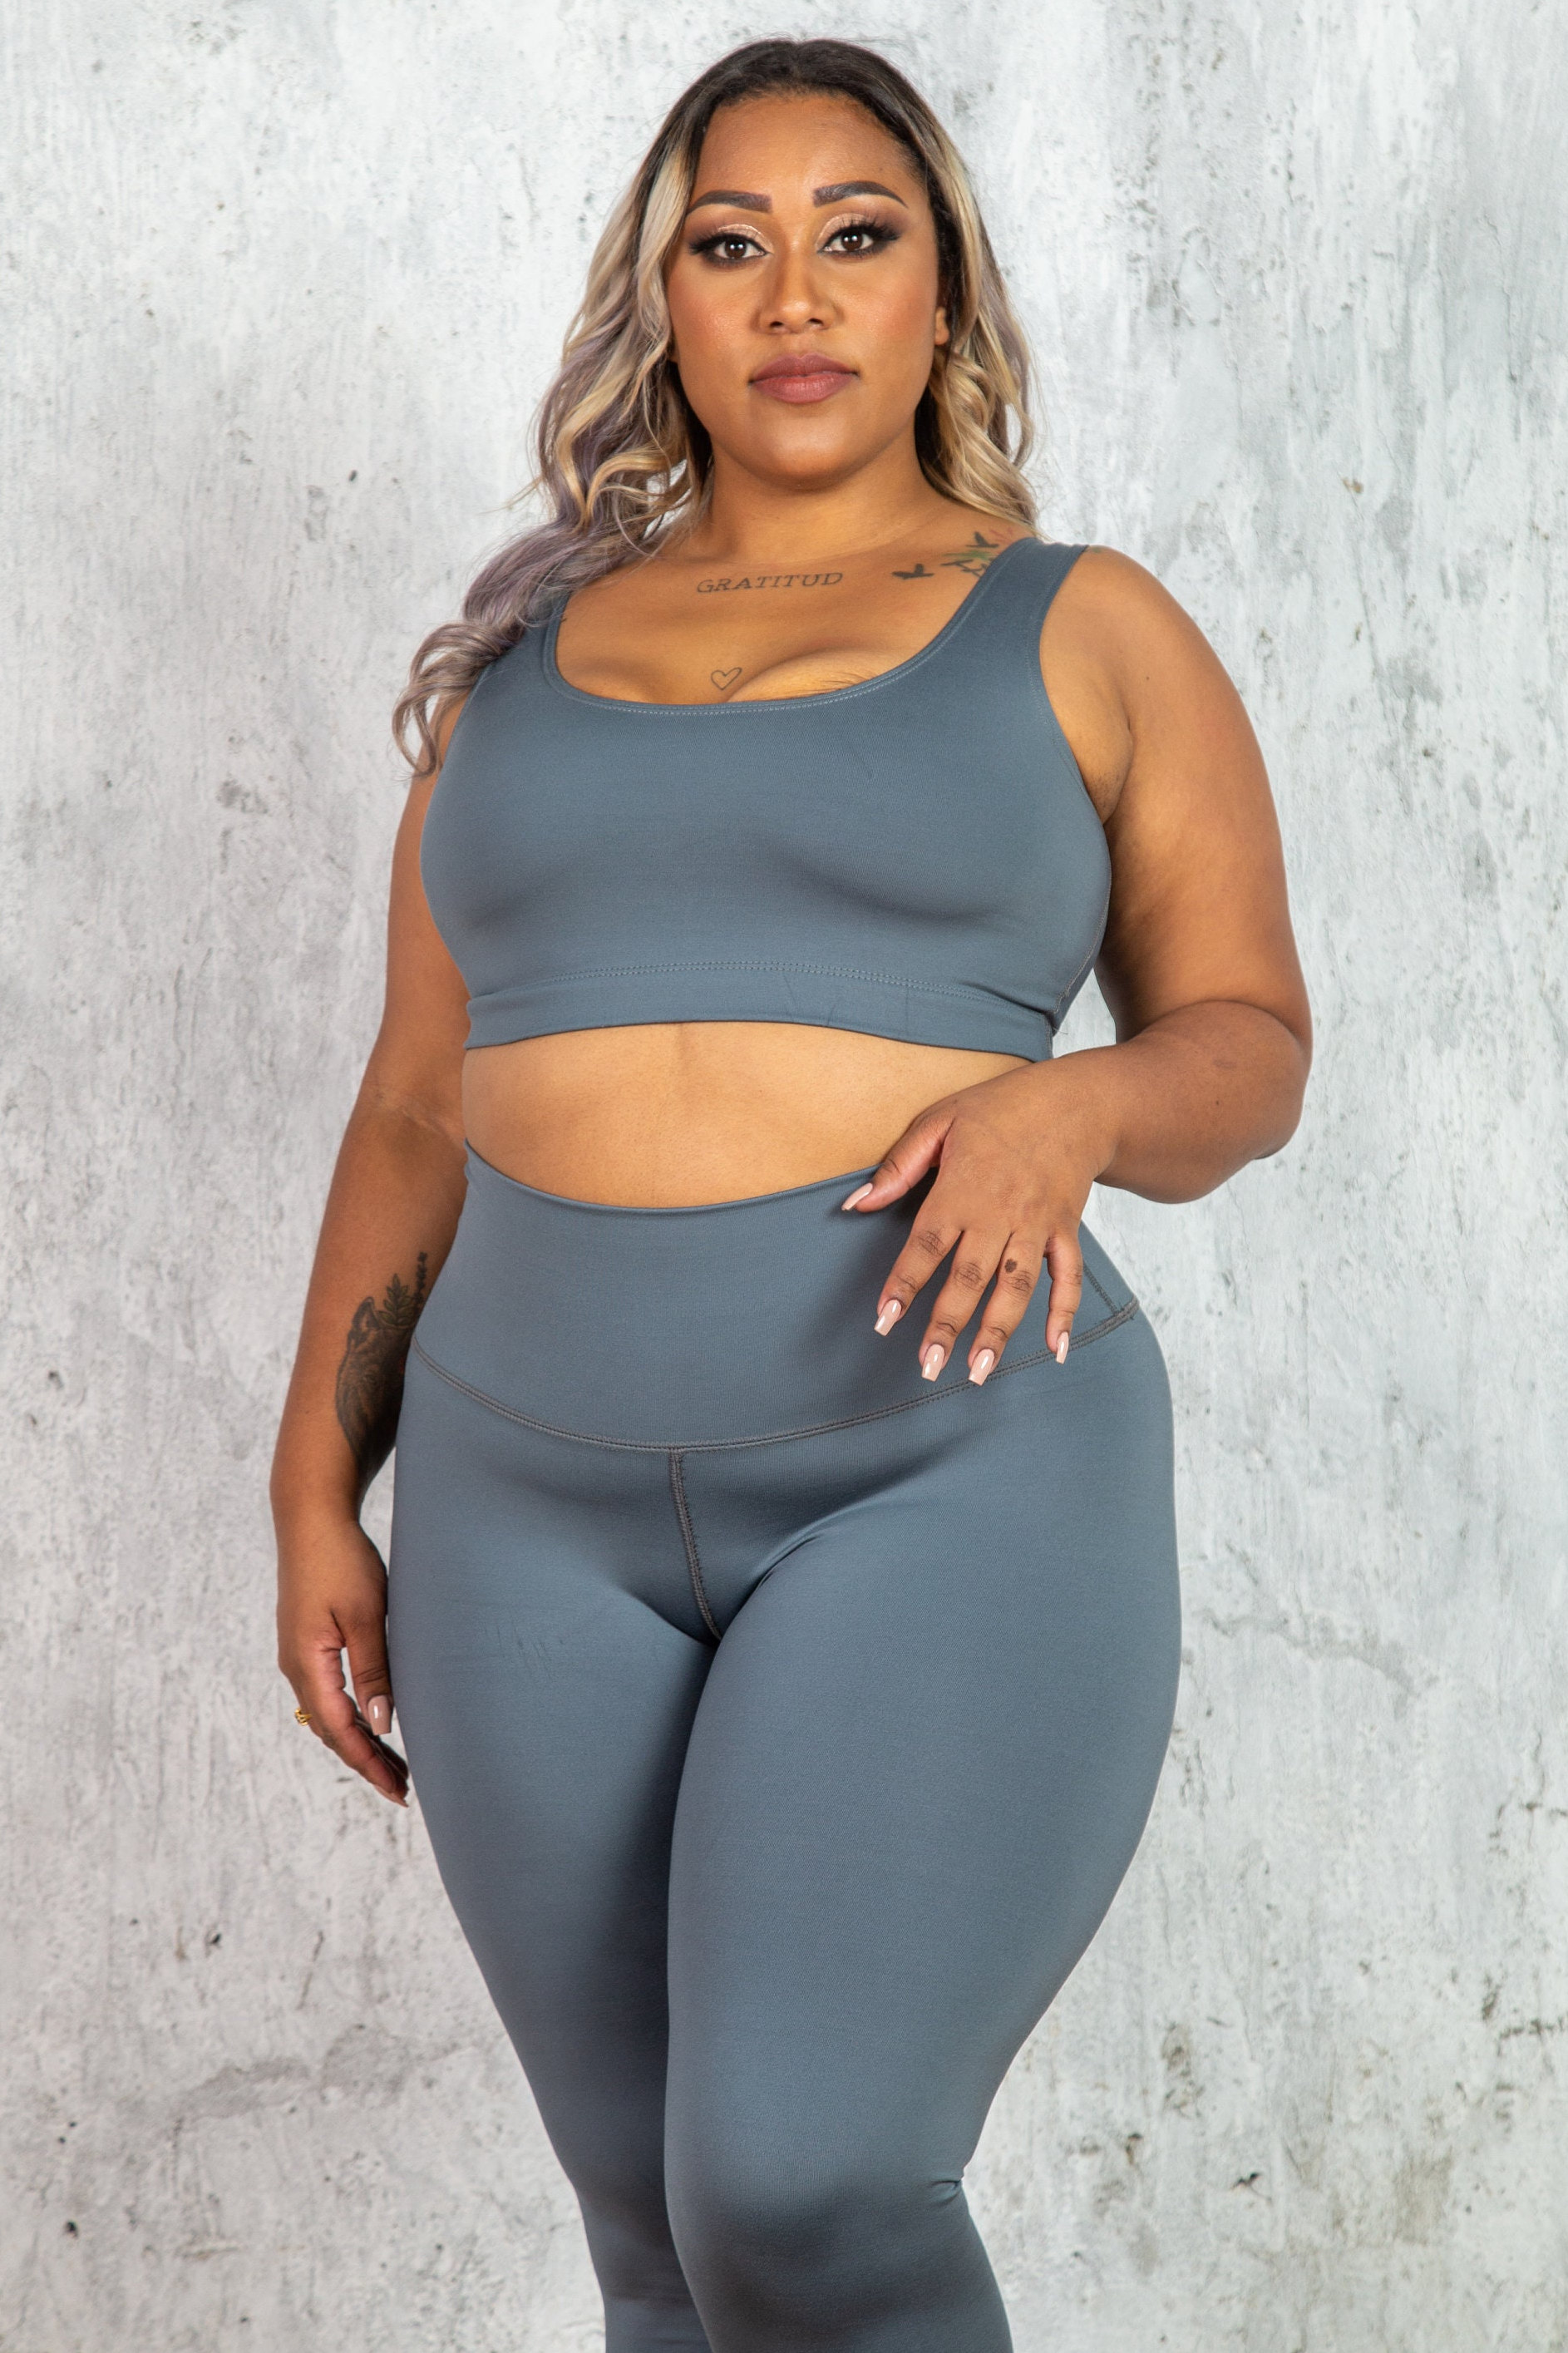 Curvy 2-piece Workout Outfit Fitness Outfit Athletic Apparel